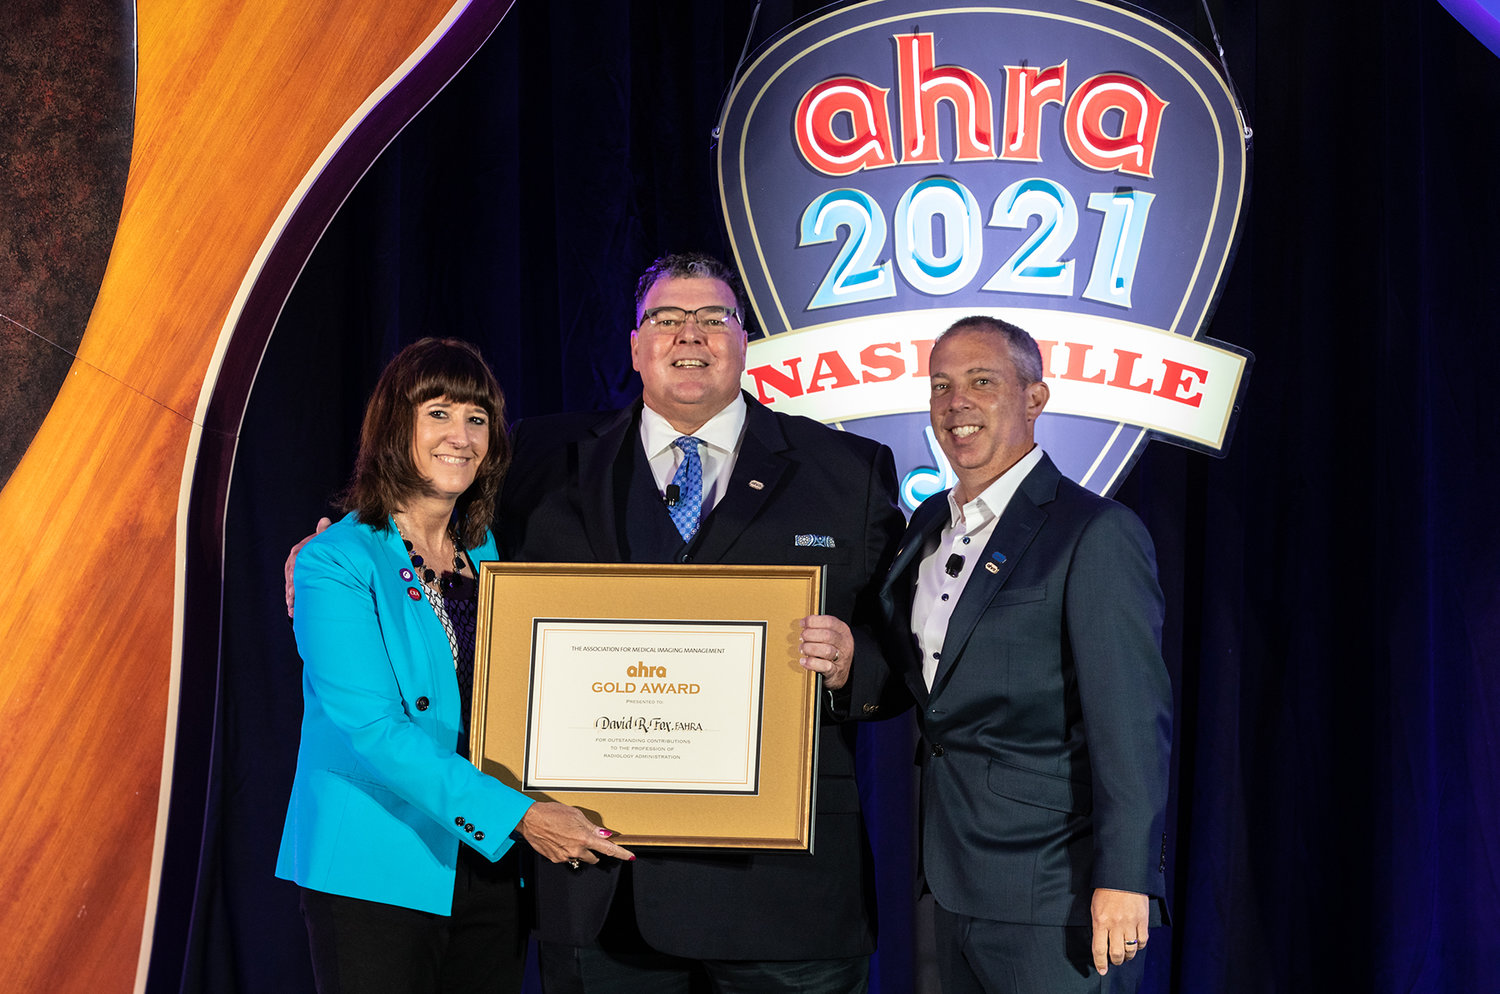 David R. Fox, Baxter Regional VP/COO, accepted the AHRA Gold Award from Jacqui Rose, AHRA President, and Jason Newmark, 2020 AHRA Gold Award recipient, at an awards ceremony at the AHRA 49th Annual Meeting and Expo on Monday, August 2.